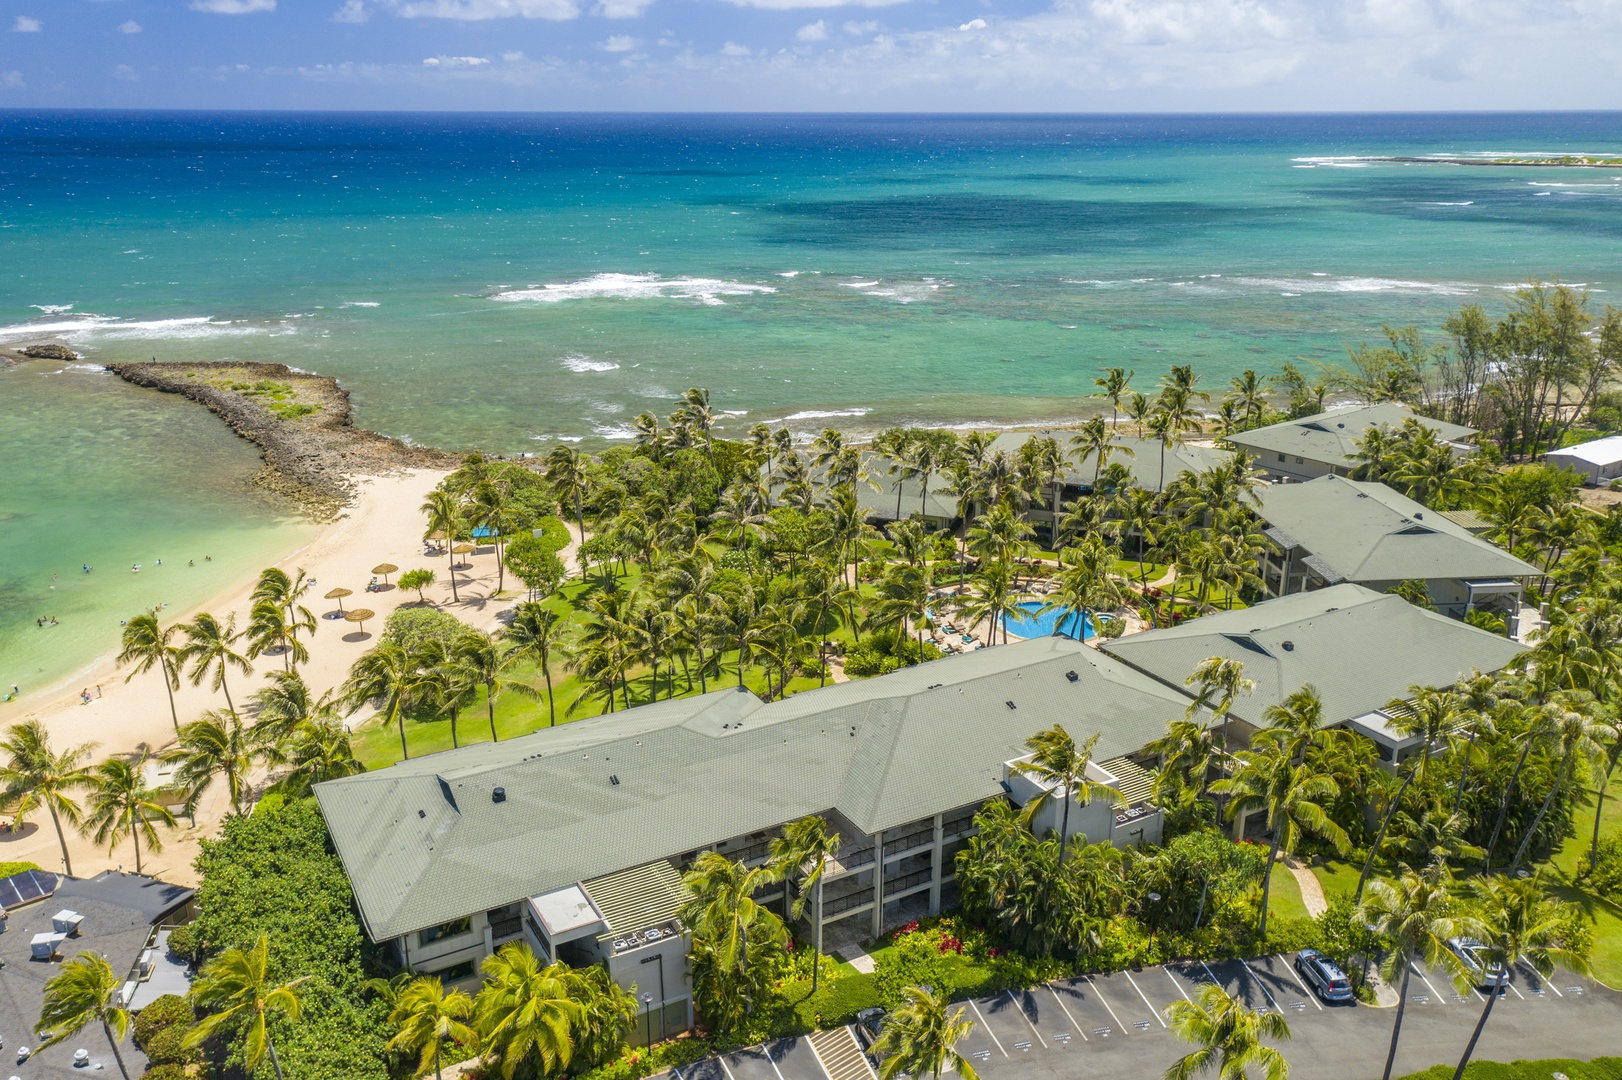 Kahuku Vacation Rentals, Turtle Bay Villas 307 - Another aerial view of the Villas